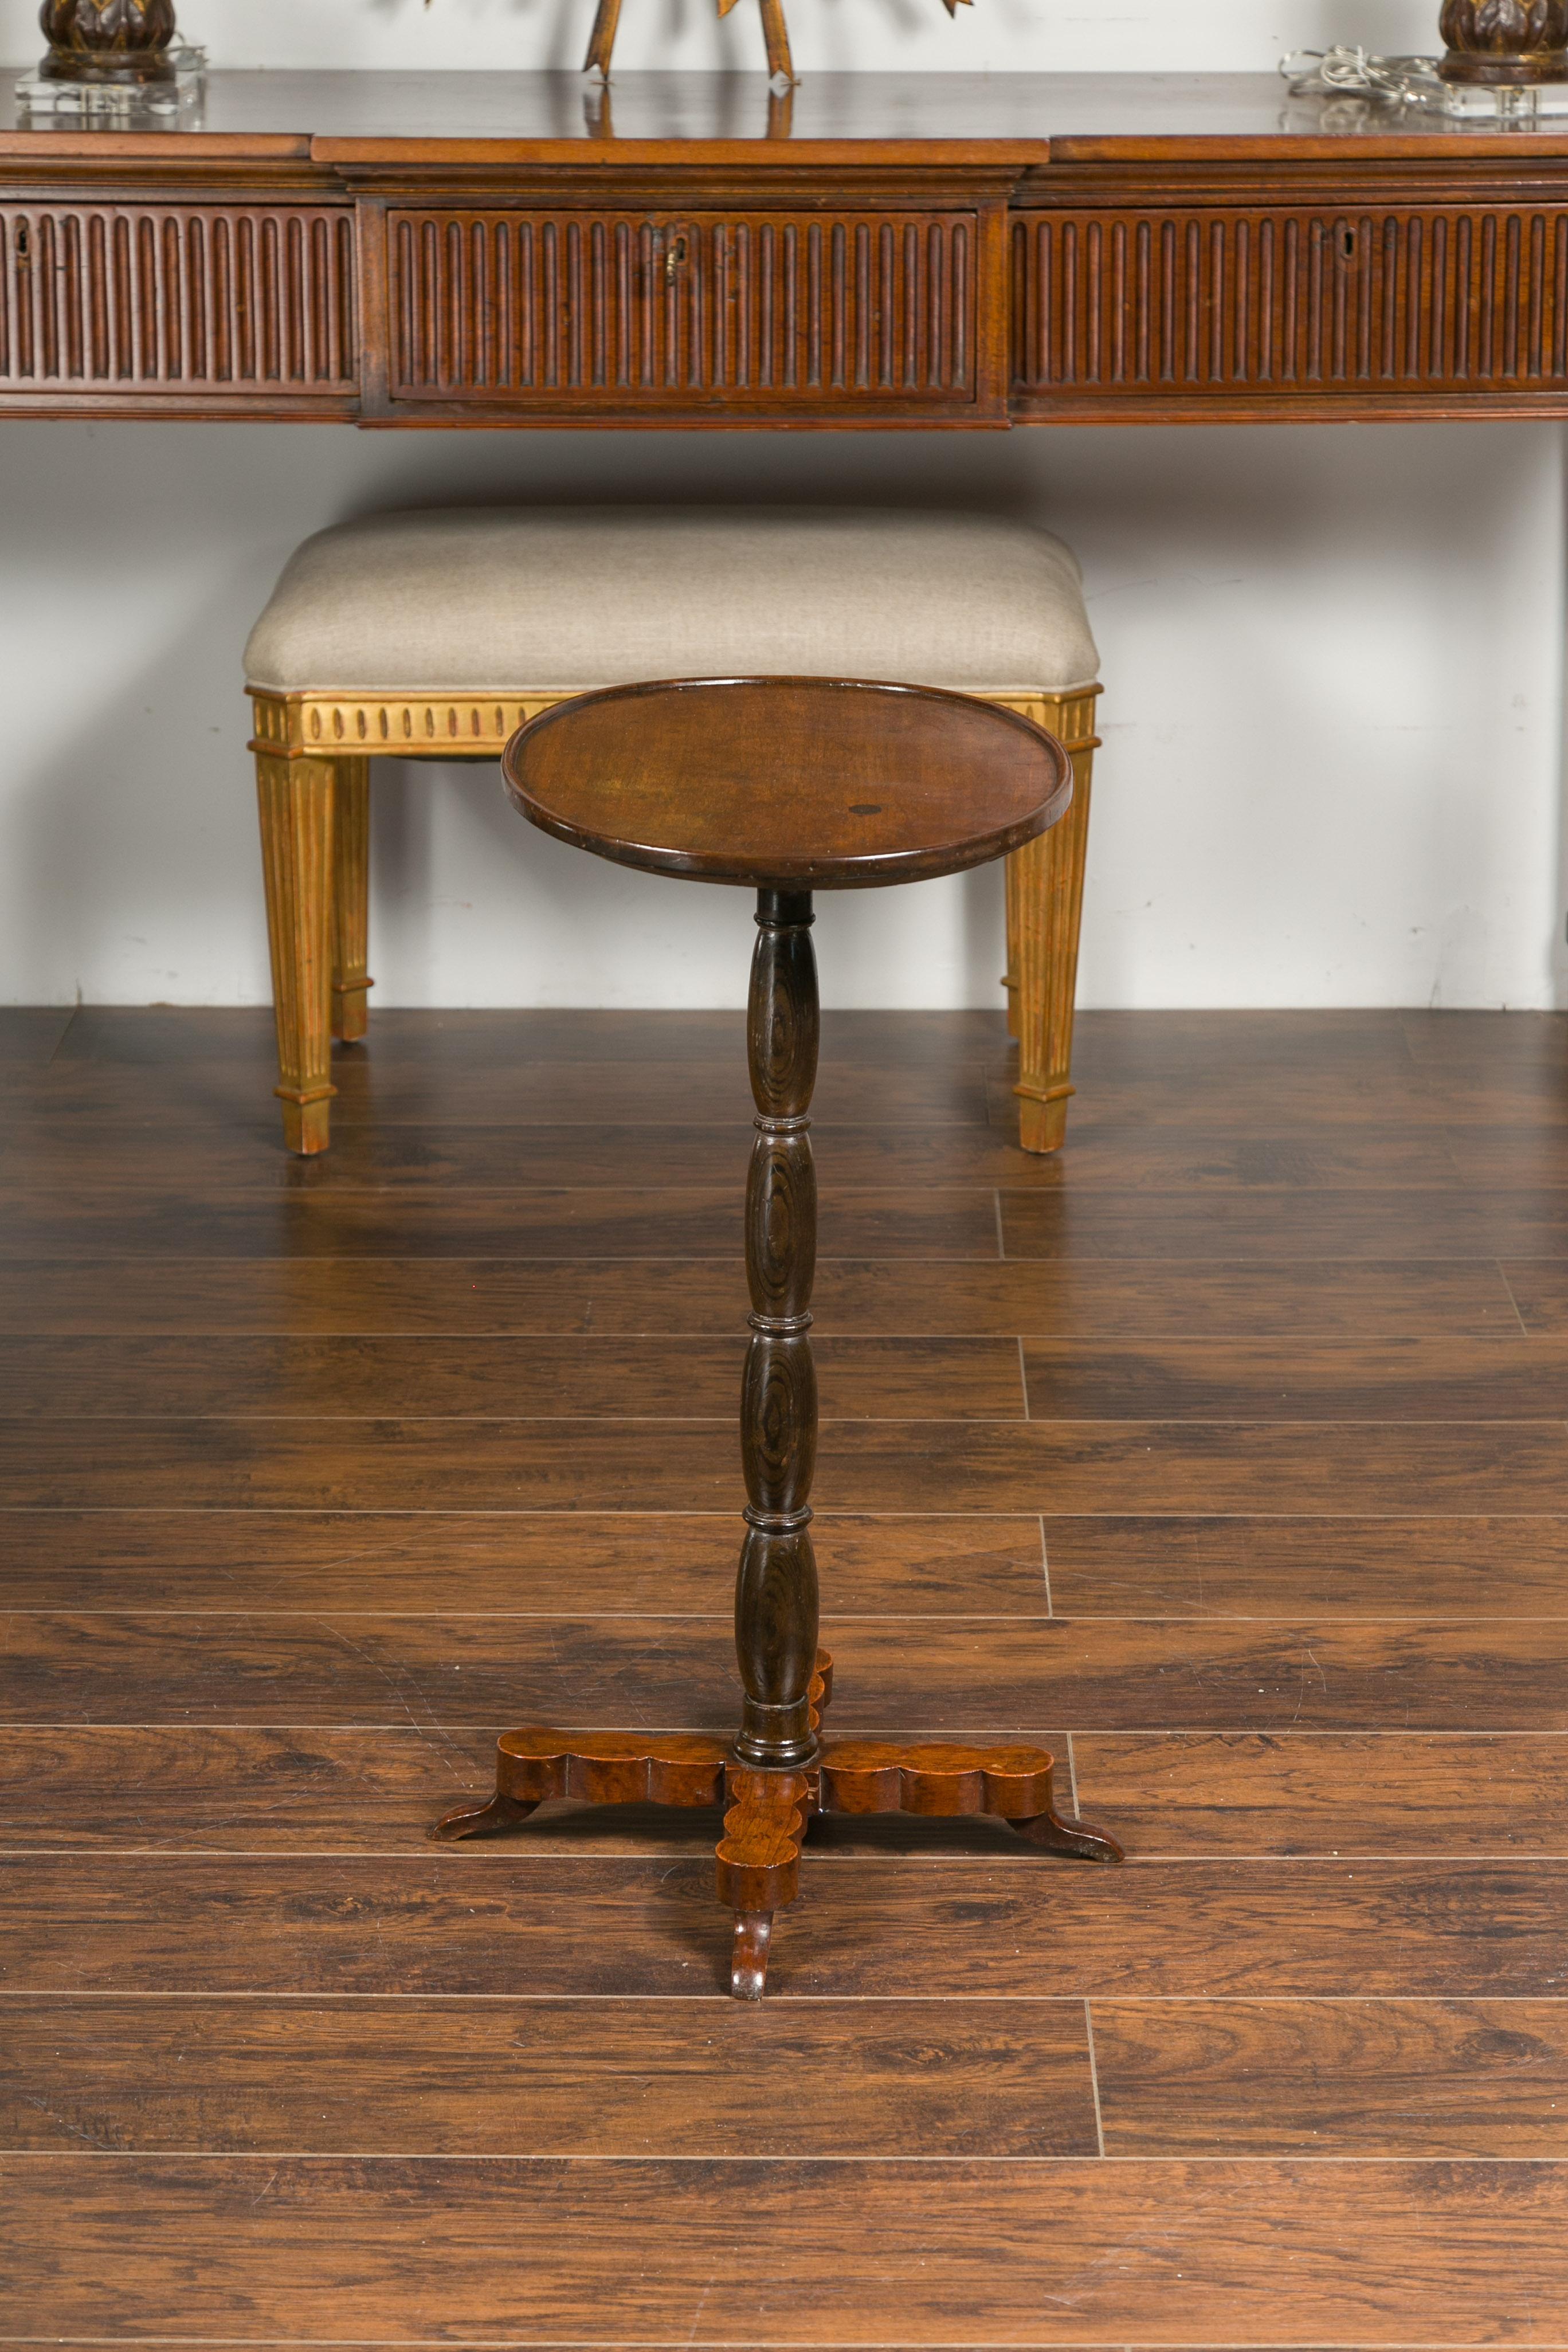 19th Century French 1890s Oval Top Walnut Guéridon Side Table with Turned Pedestal Base